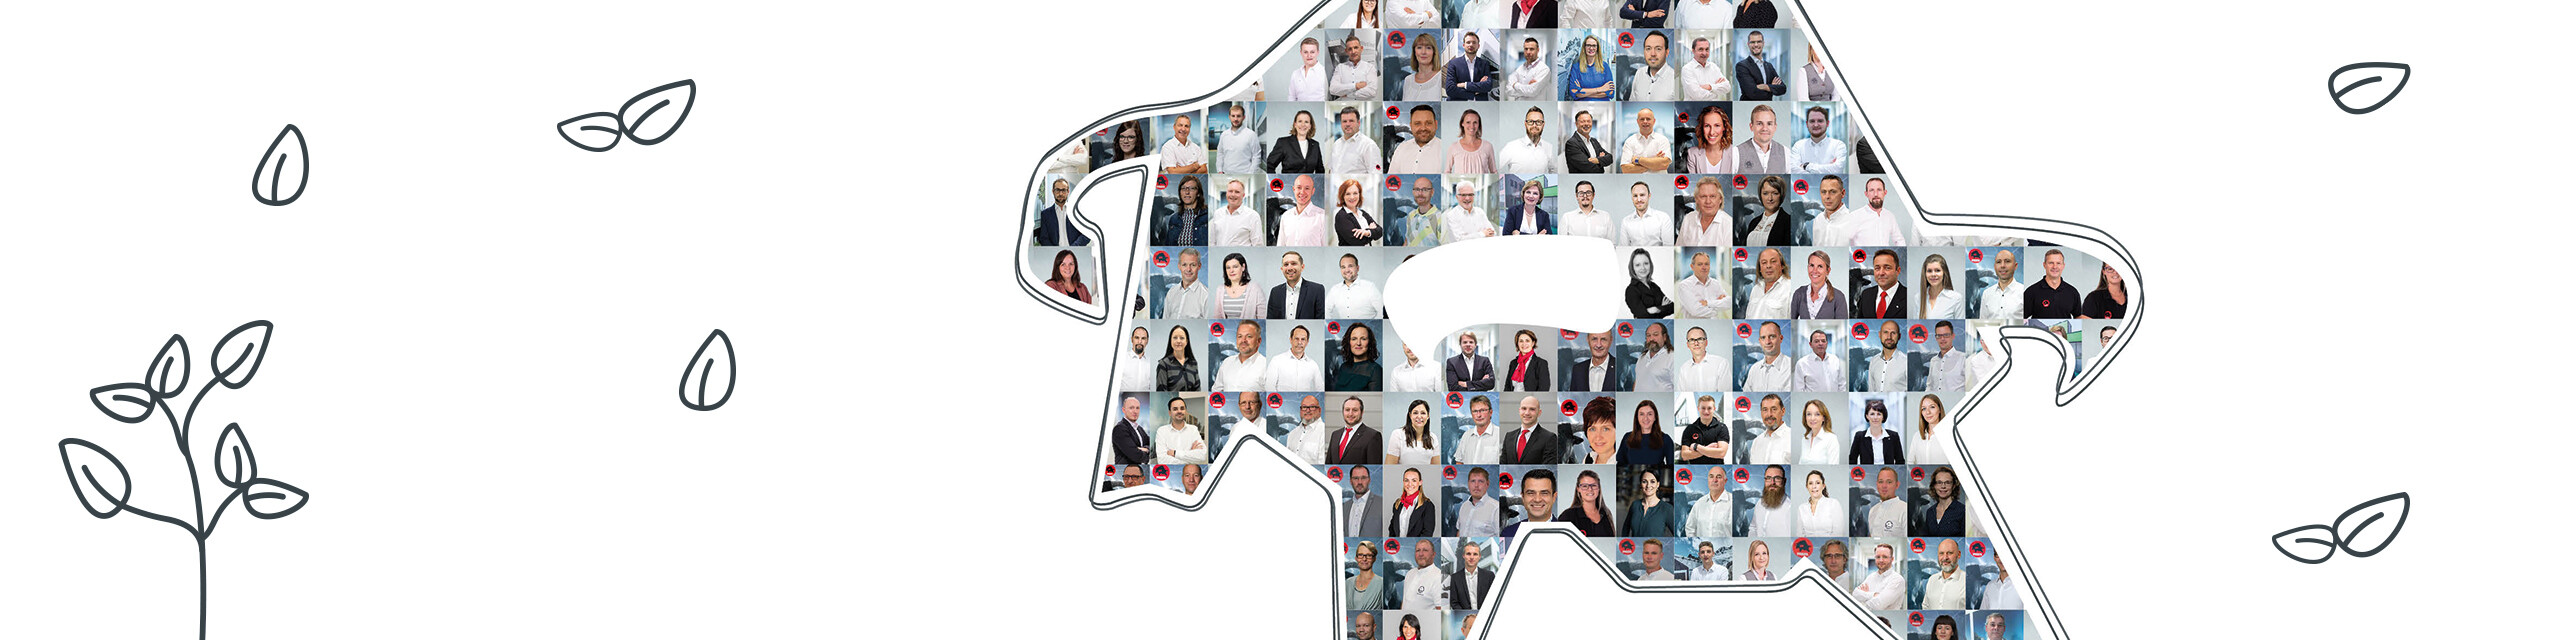 PREFA bull logo filled with the portraits of the employees - symbolises the values and goals of PREFA, we are part of CAG Holding